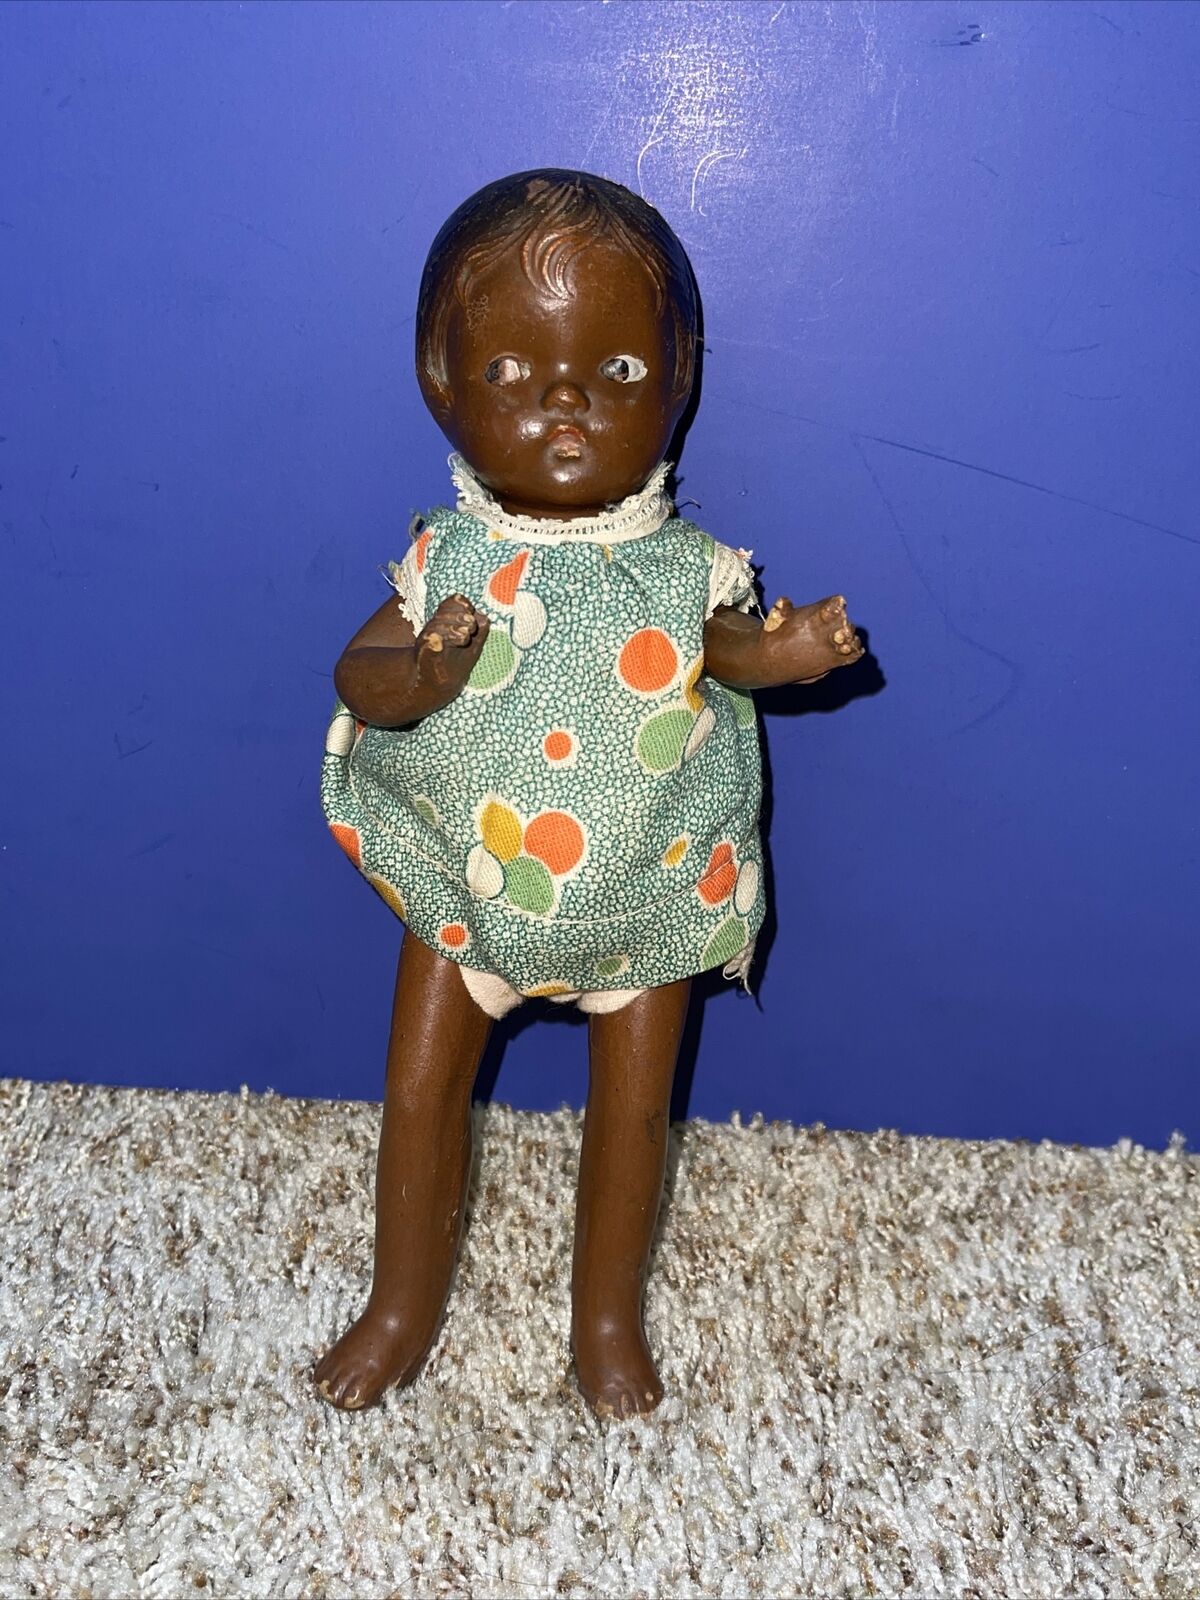 Vintage 10” African American Jointed Composition Doll Patsy? Or Friend